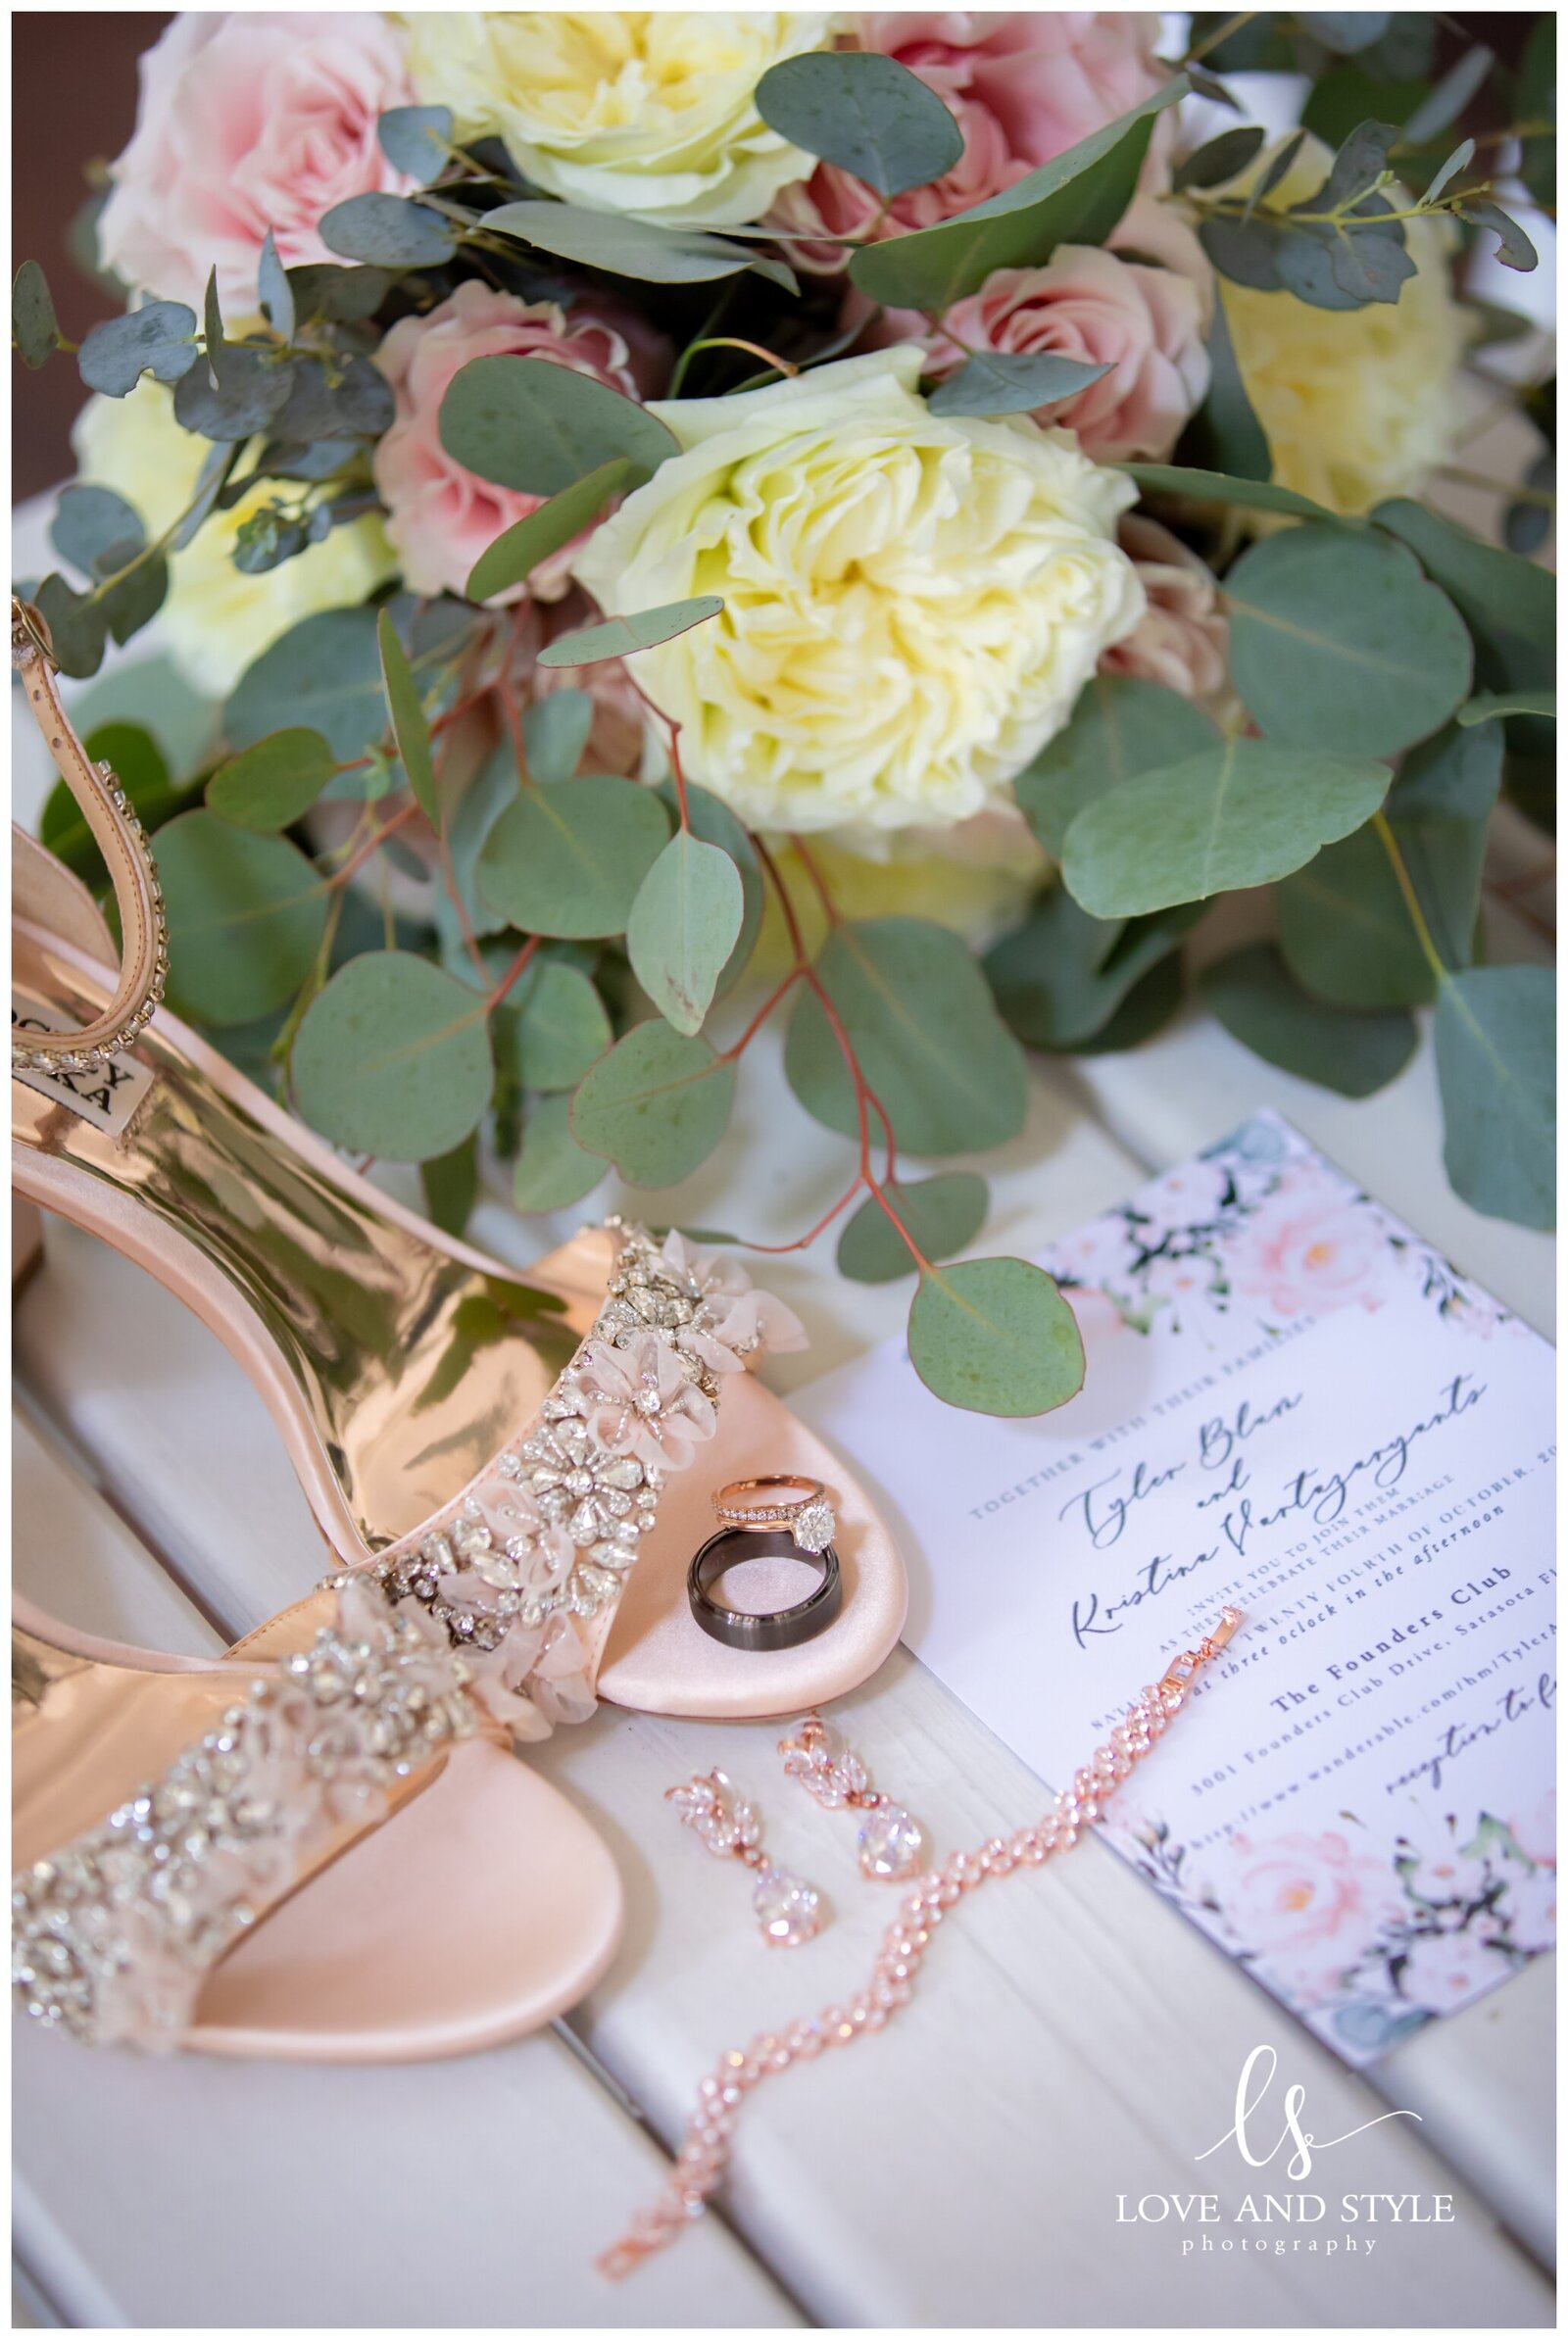 Detail shot of rose gold wedding shoes, invitation and brides jewelry